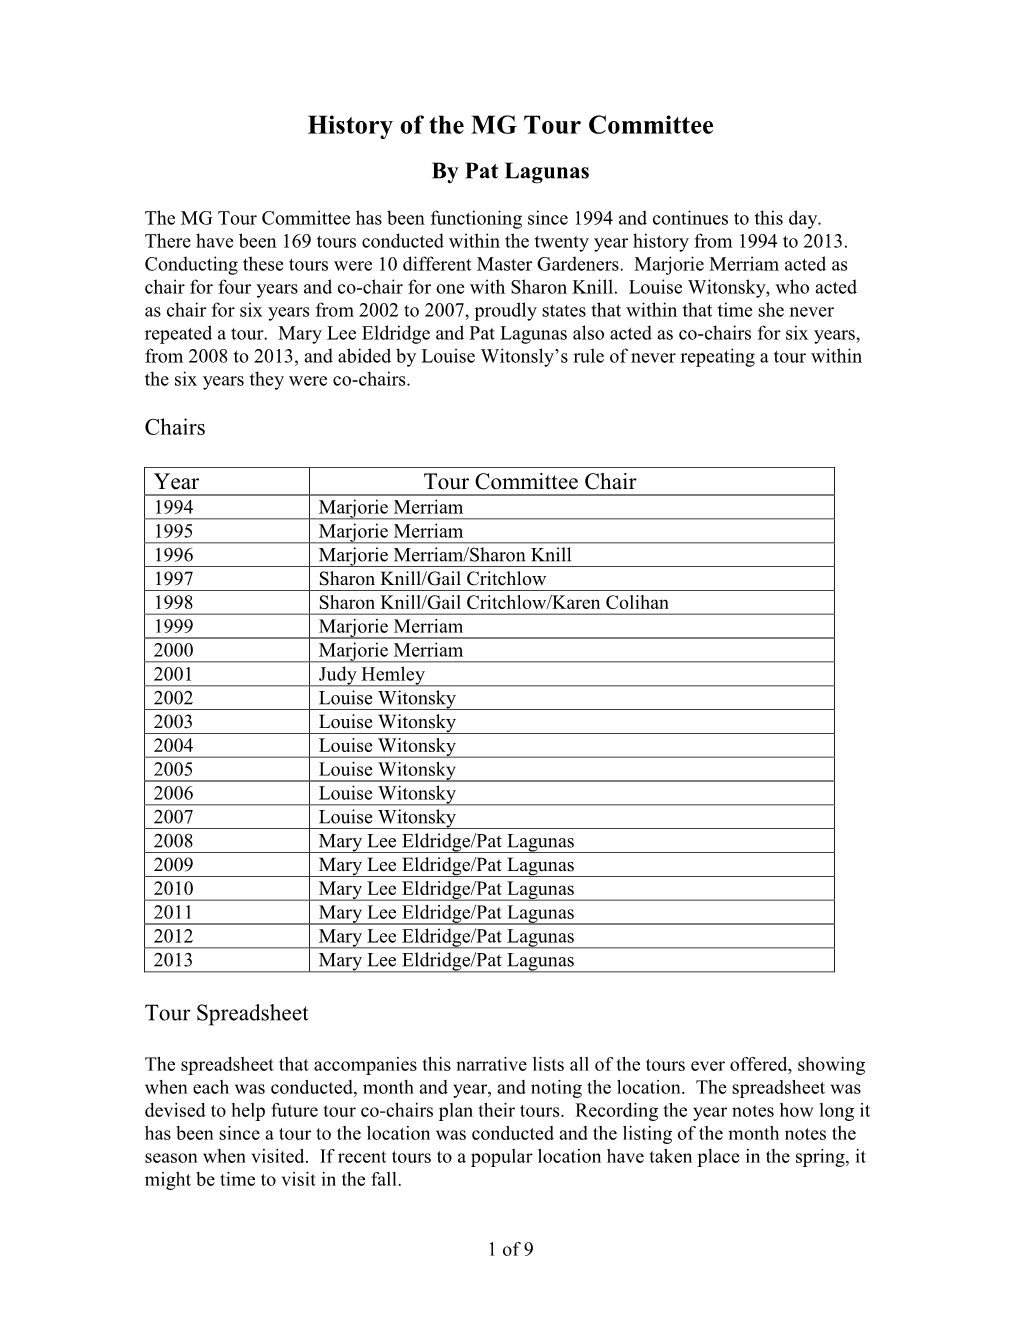 History of the Tour Committee